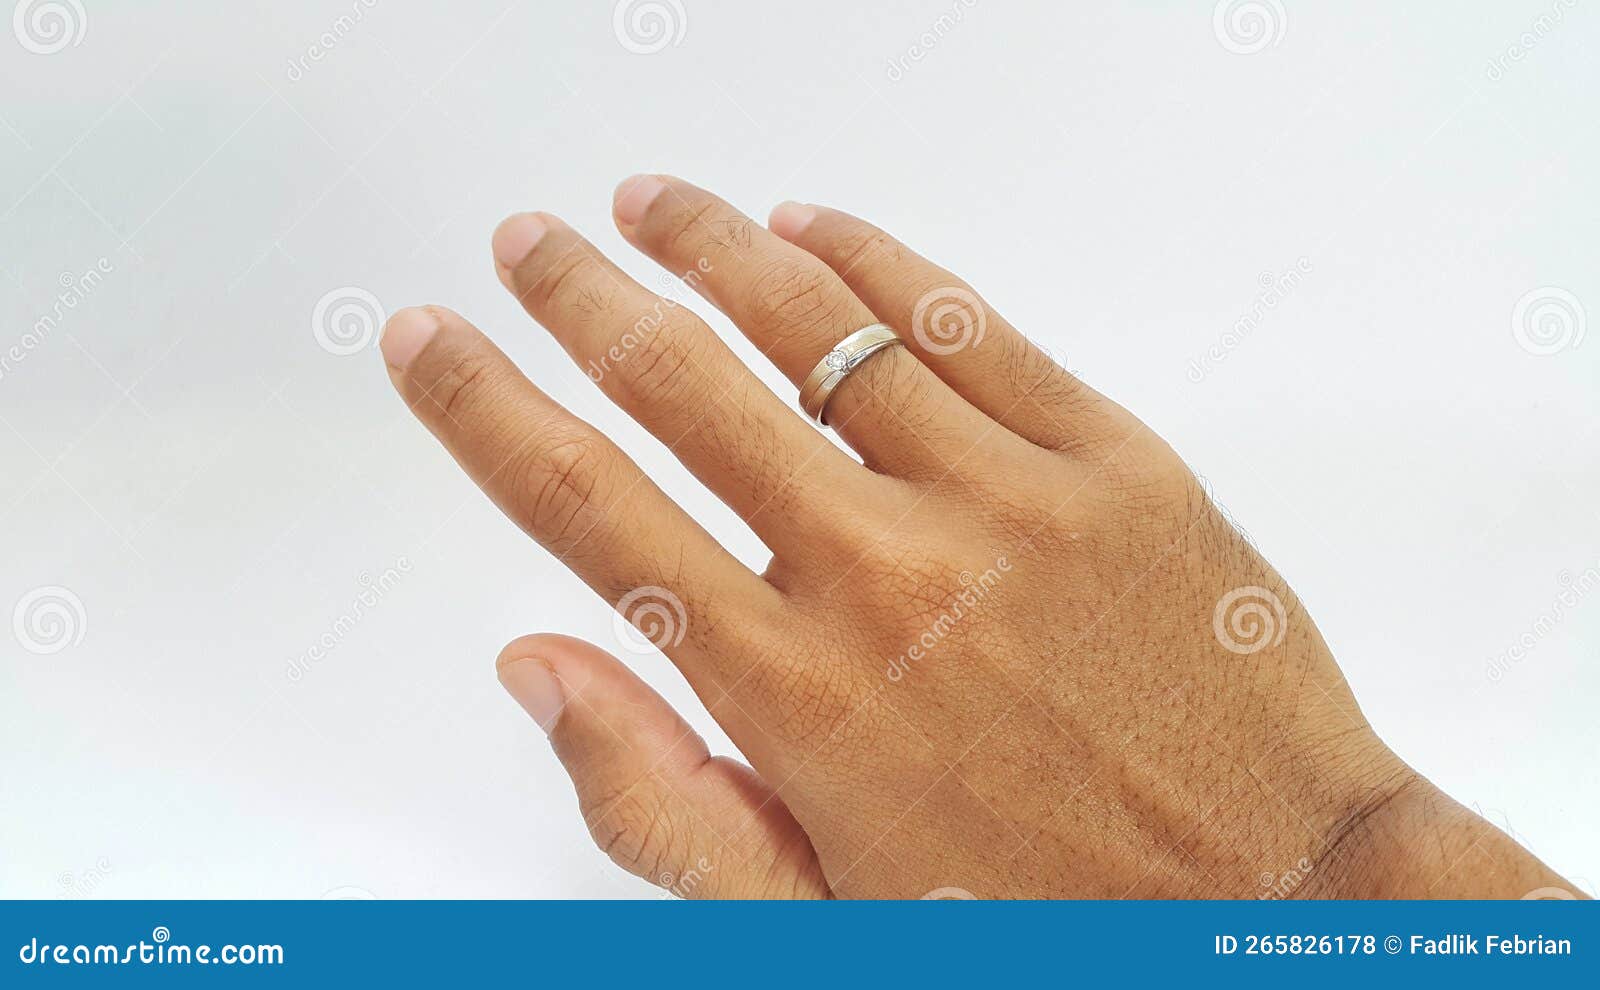 Accurate Body Language, “Should the Wedding Ring be on the Left or Right  Ring Finger?” – Accurate Body Language